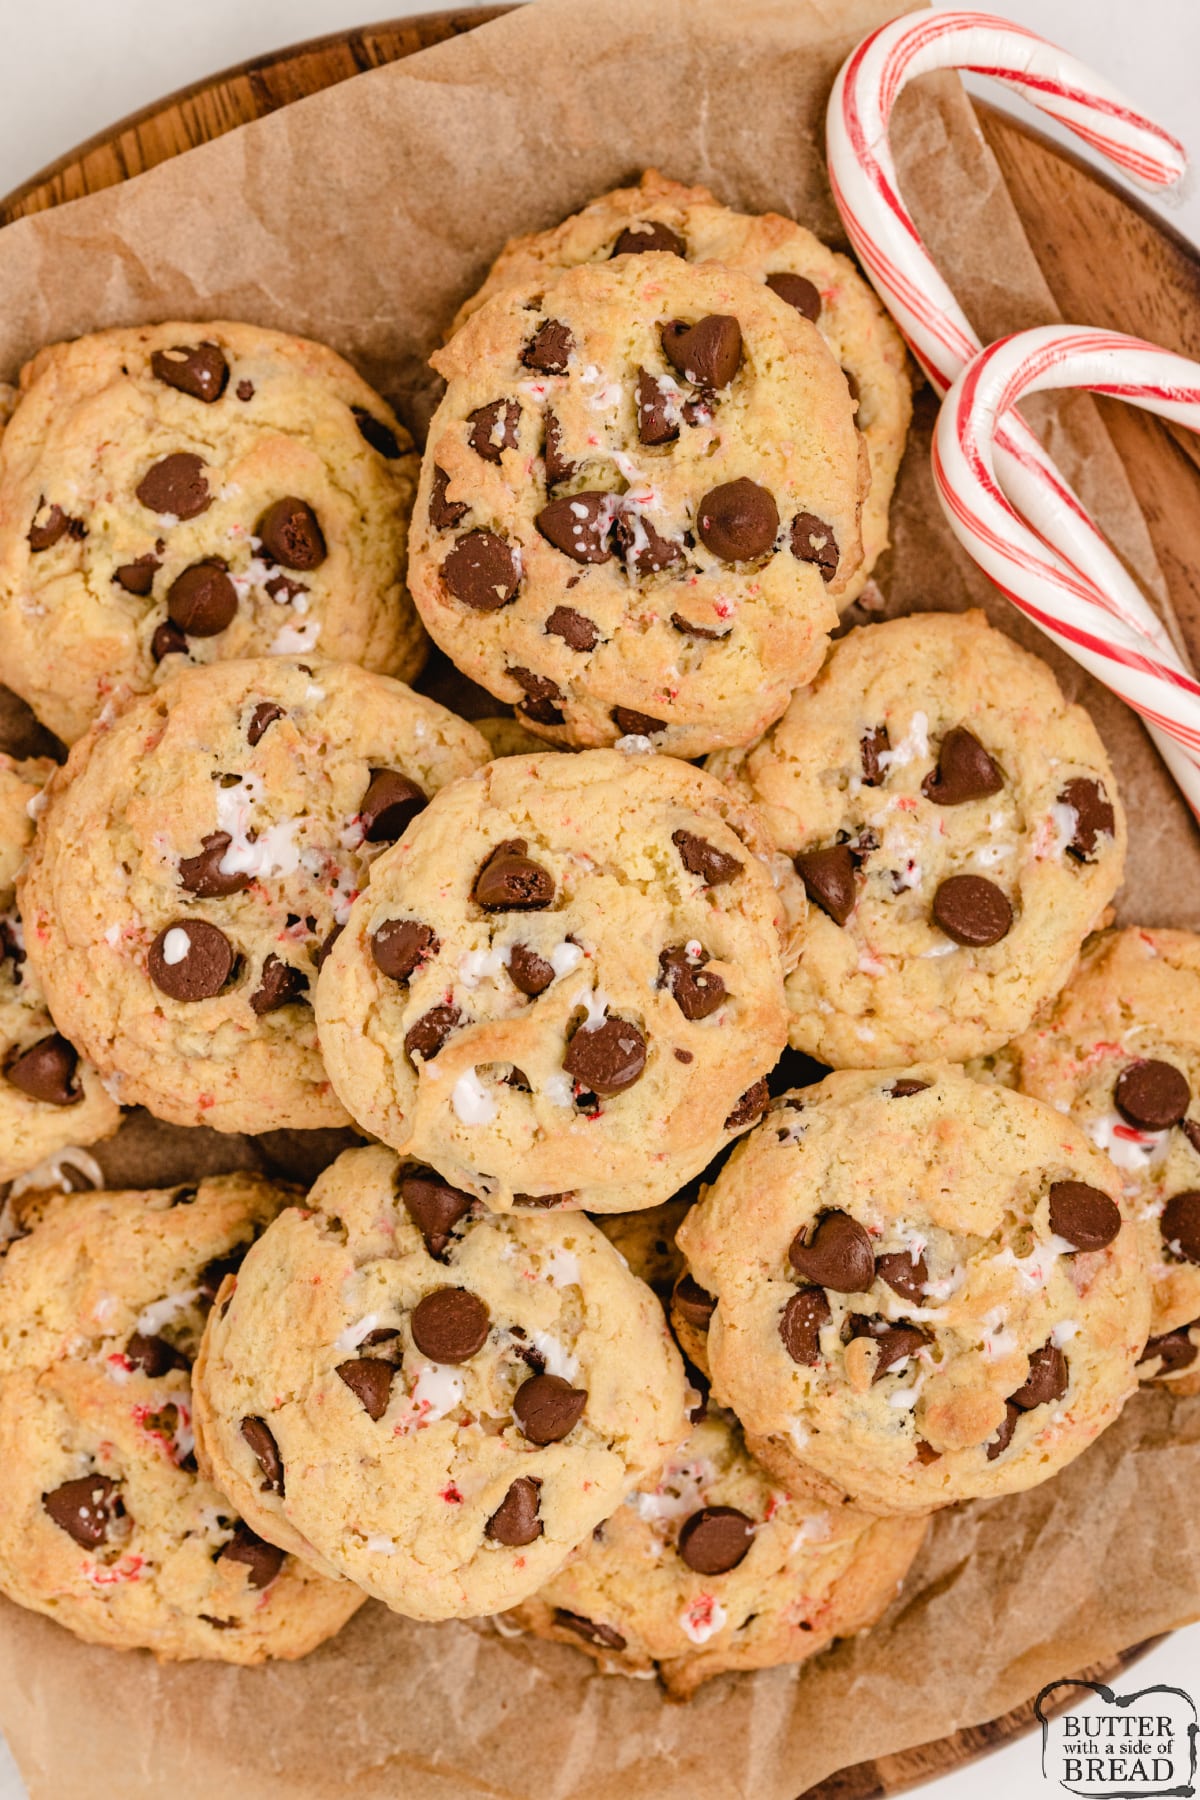 Peppermint Chocolate Chip Cookies are made with crushed candy canes, pudding mix, peppermint extract, and chocolate chips. These soft and chewy cookies are perfect for the holidays!